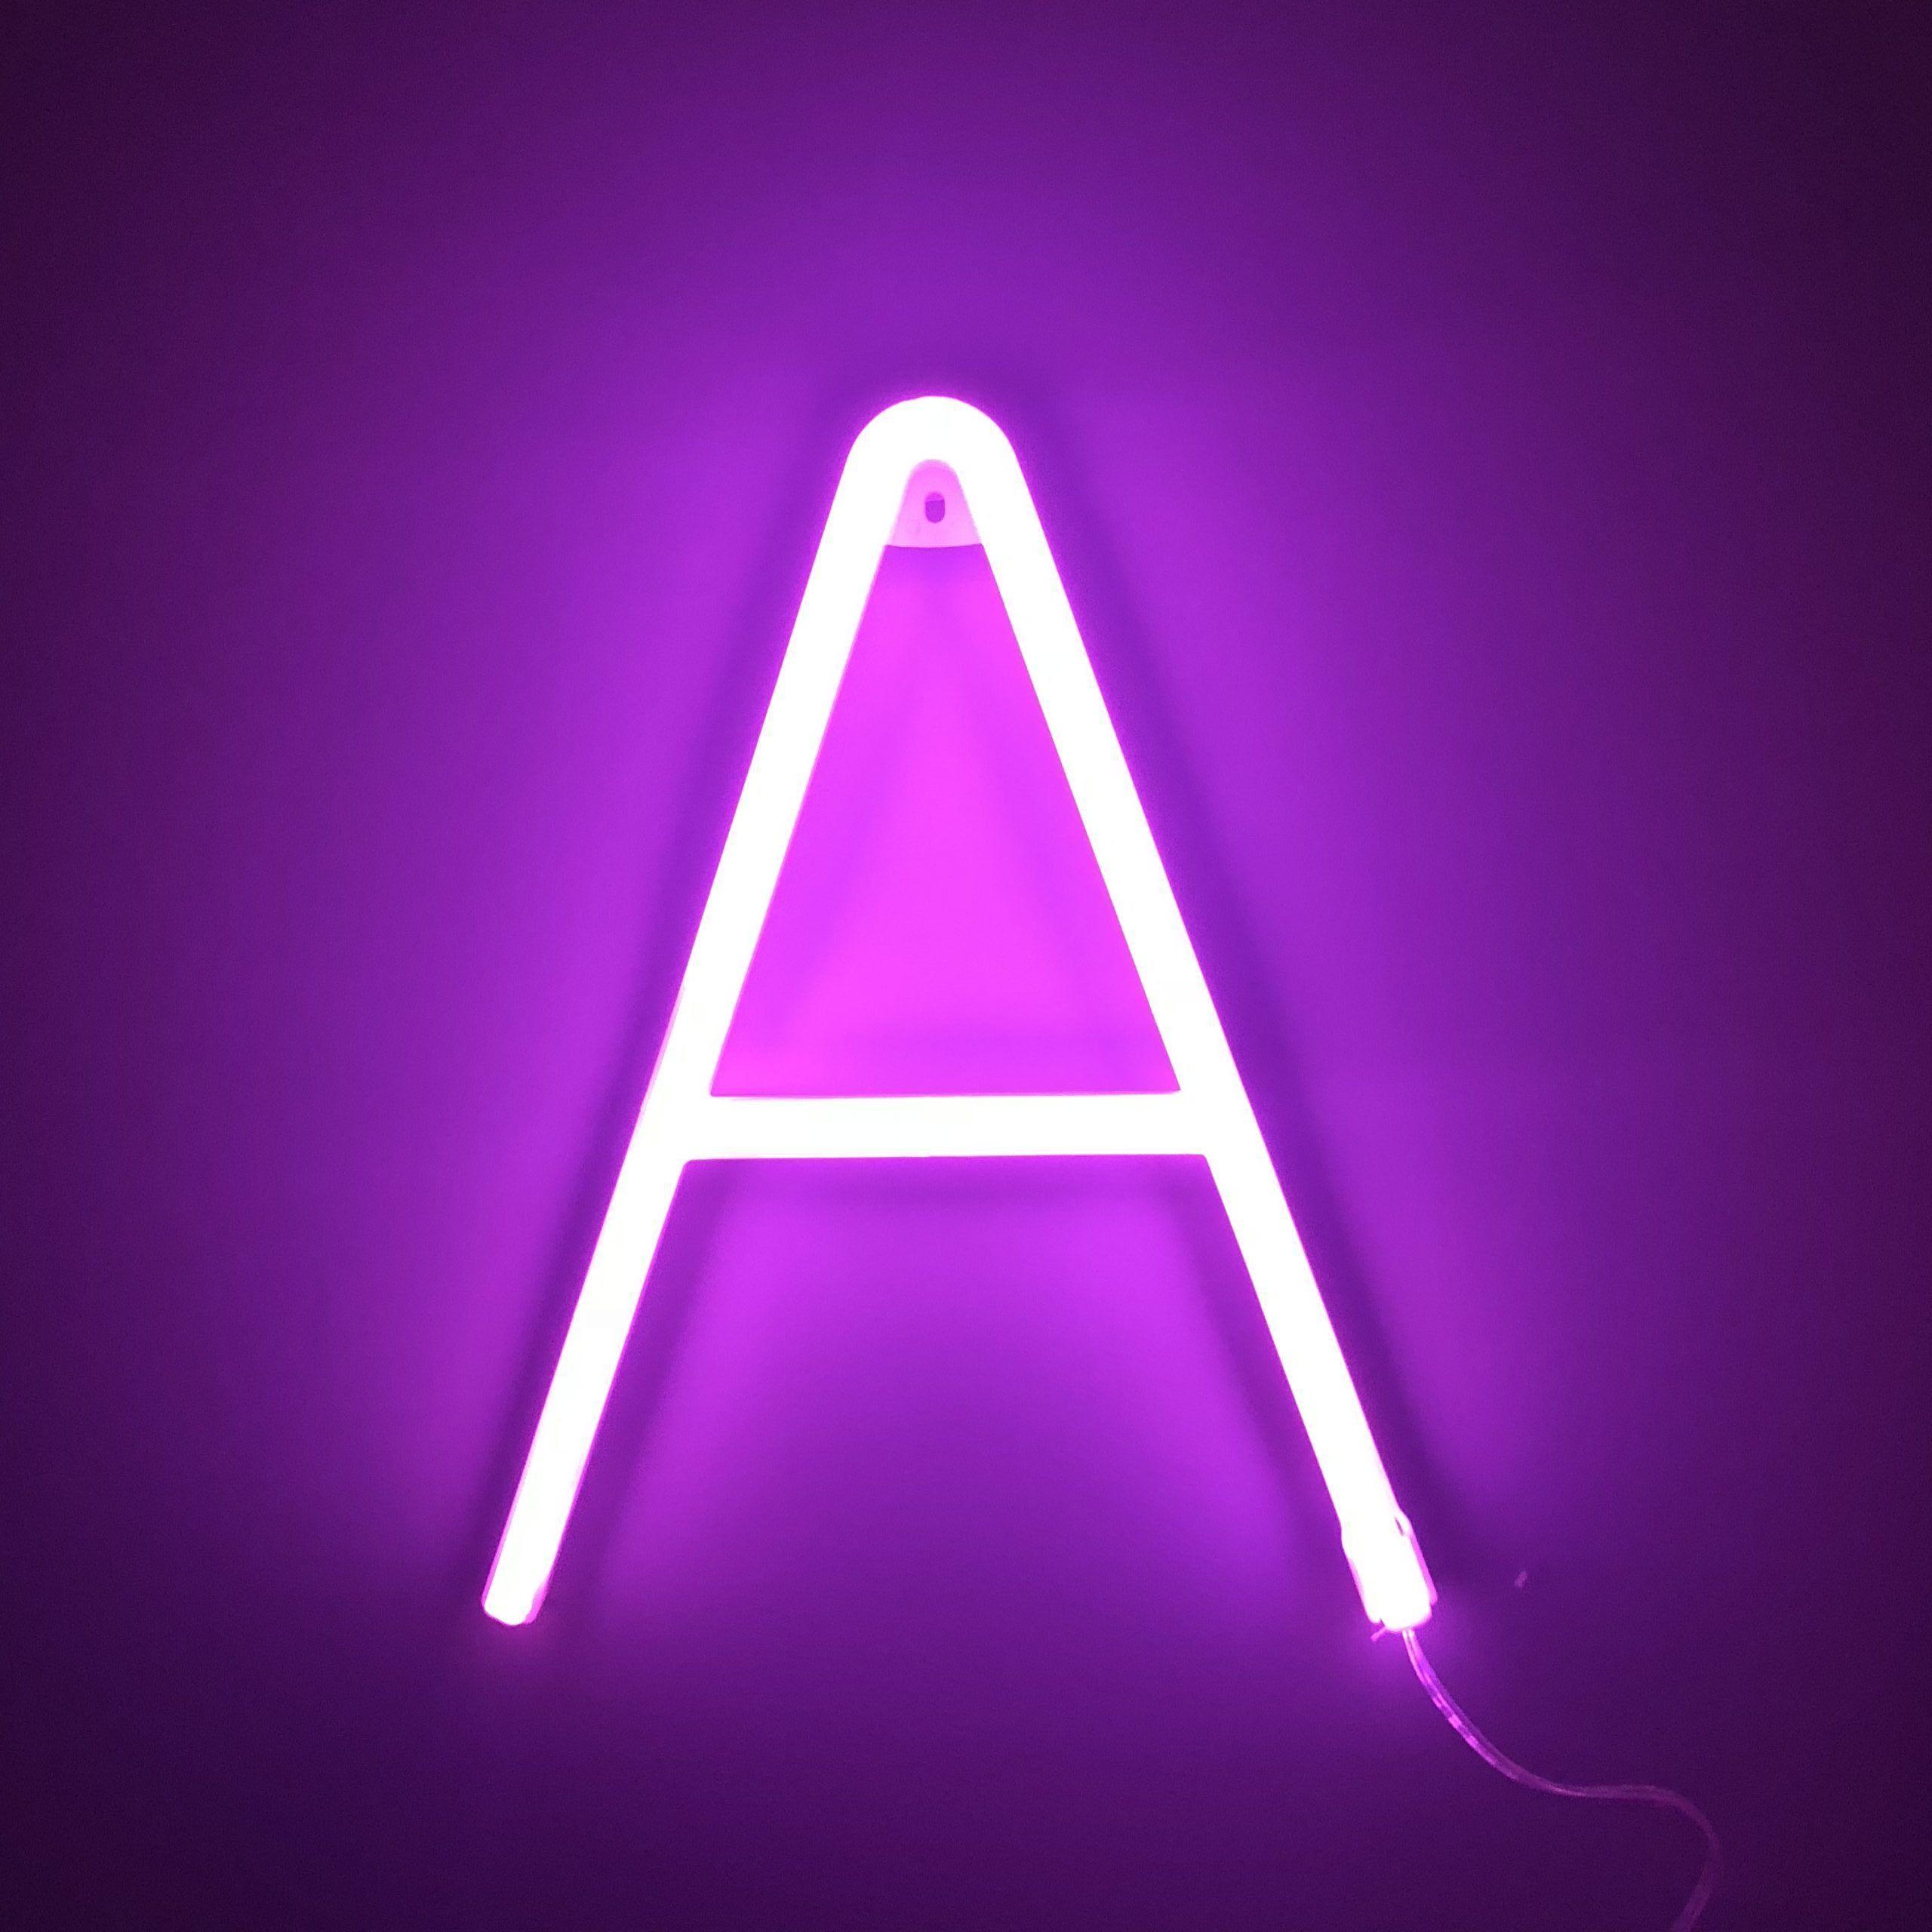 Neon Letters Wallpapers - Top Free Neon Letters Backgrounds ...